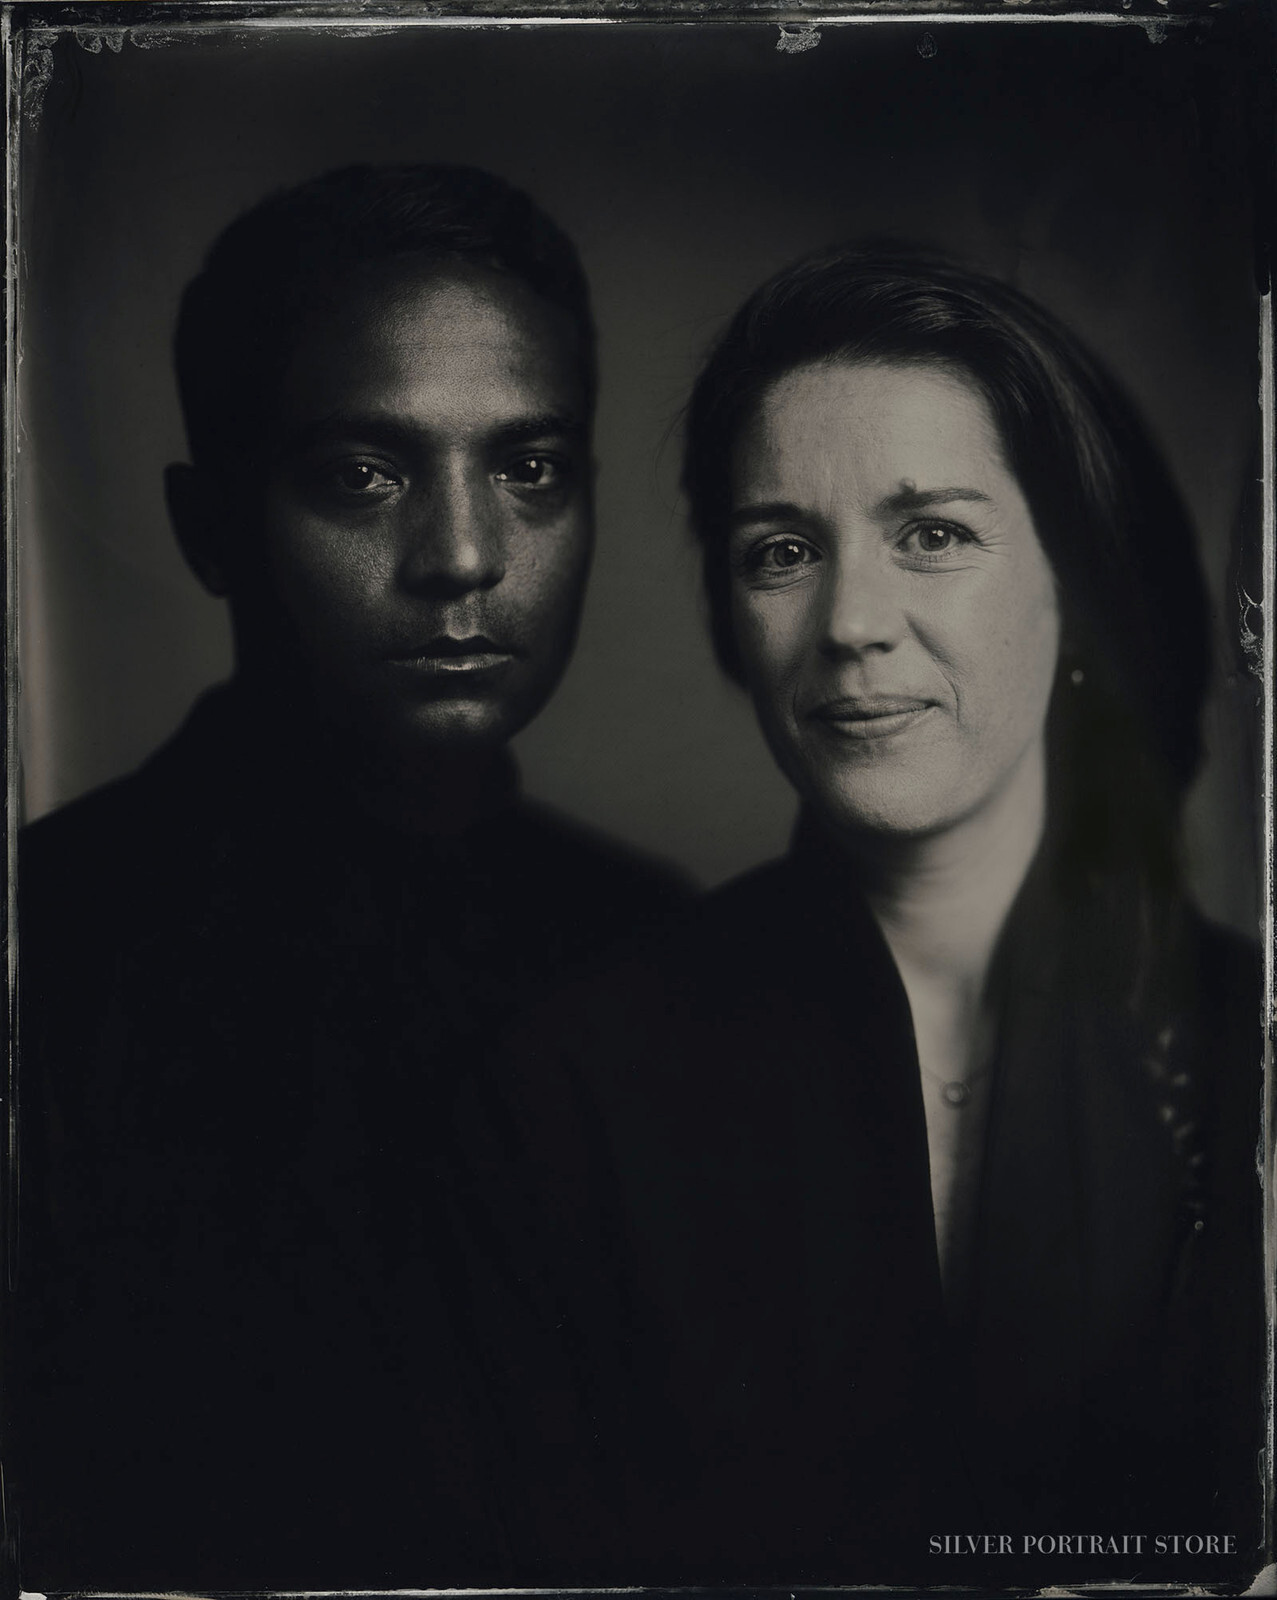 Christopher & Anouk-Silver Portrait Store-scan from Wet plate collodion-Tintype 20 x 25 cm.